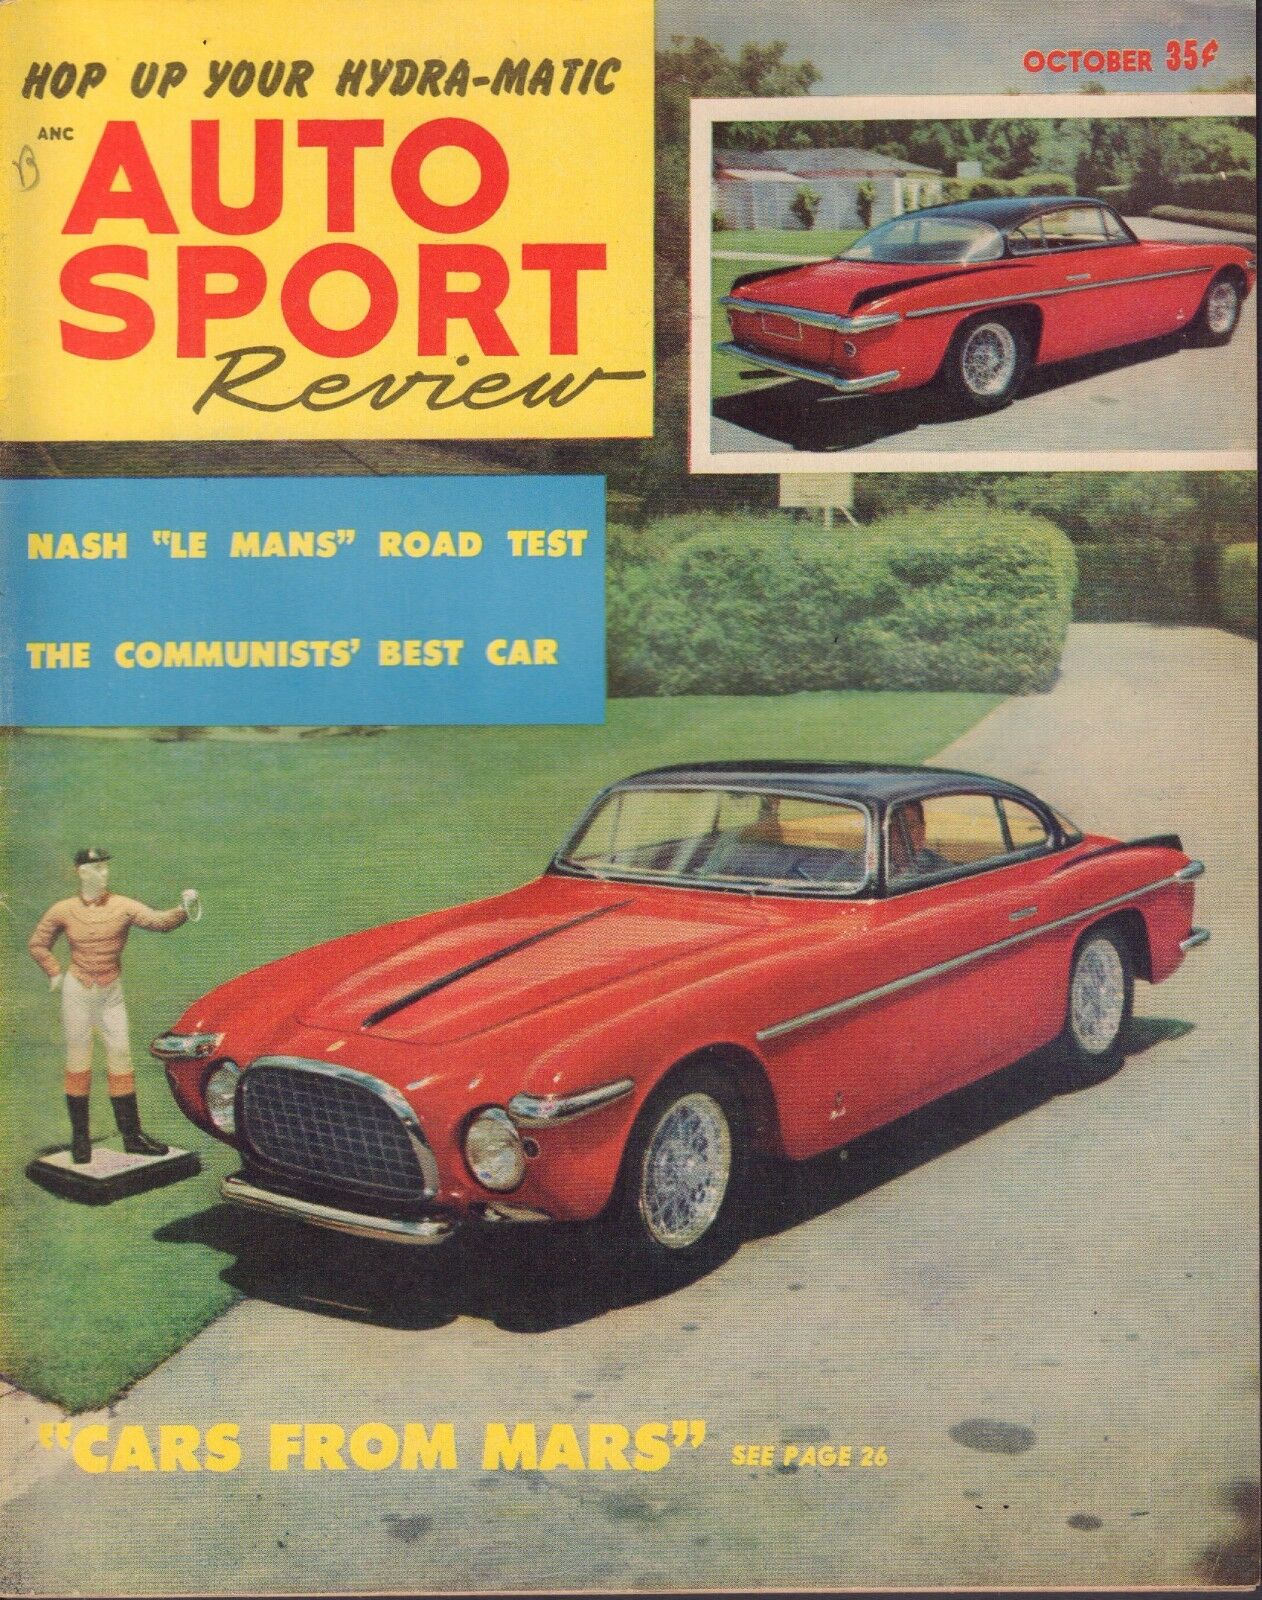 Auto Sport Review # 6, October 1953 magazine back issue Auto Sport Review magizine back copy Auto Sport Review # 6, October 1953 Car Racing Auto Mobile Magazine Back Issue Published by Motorsport. Nash Le Mans Road Test.